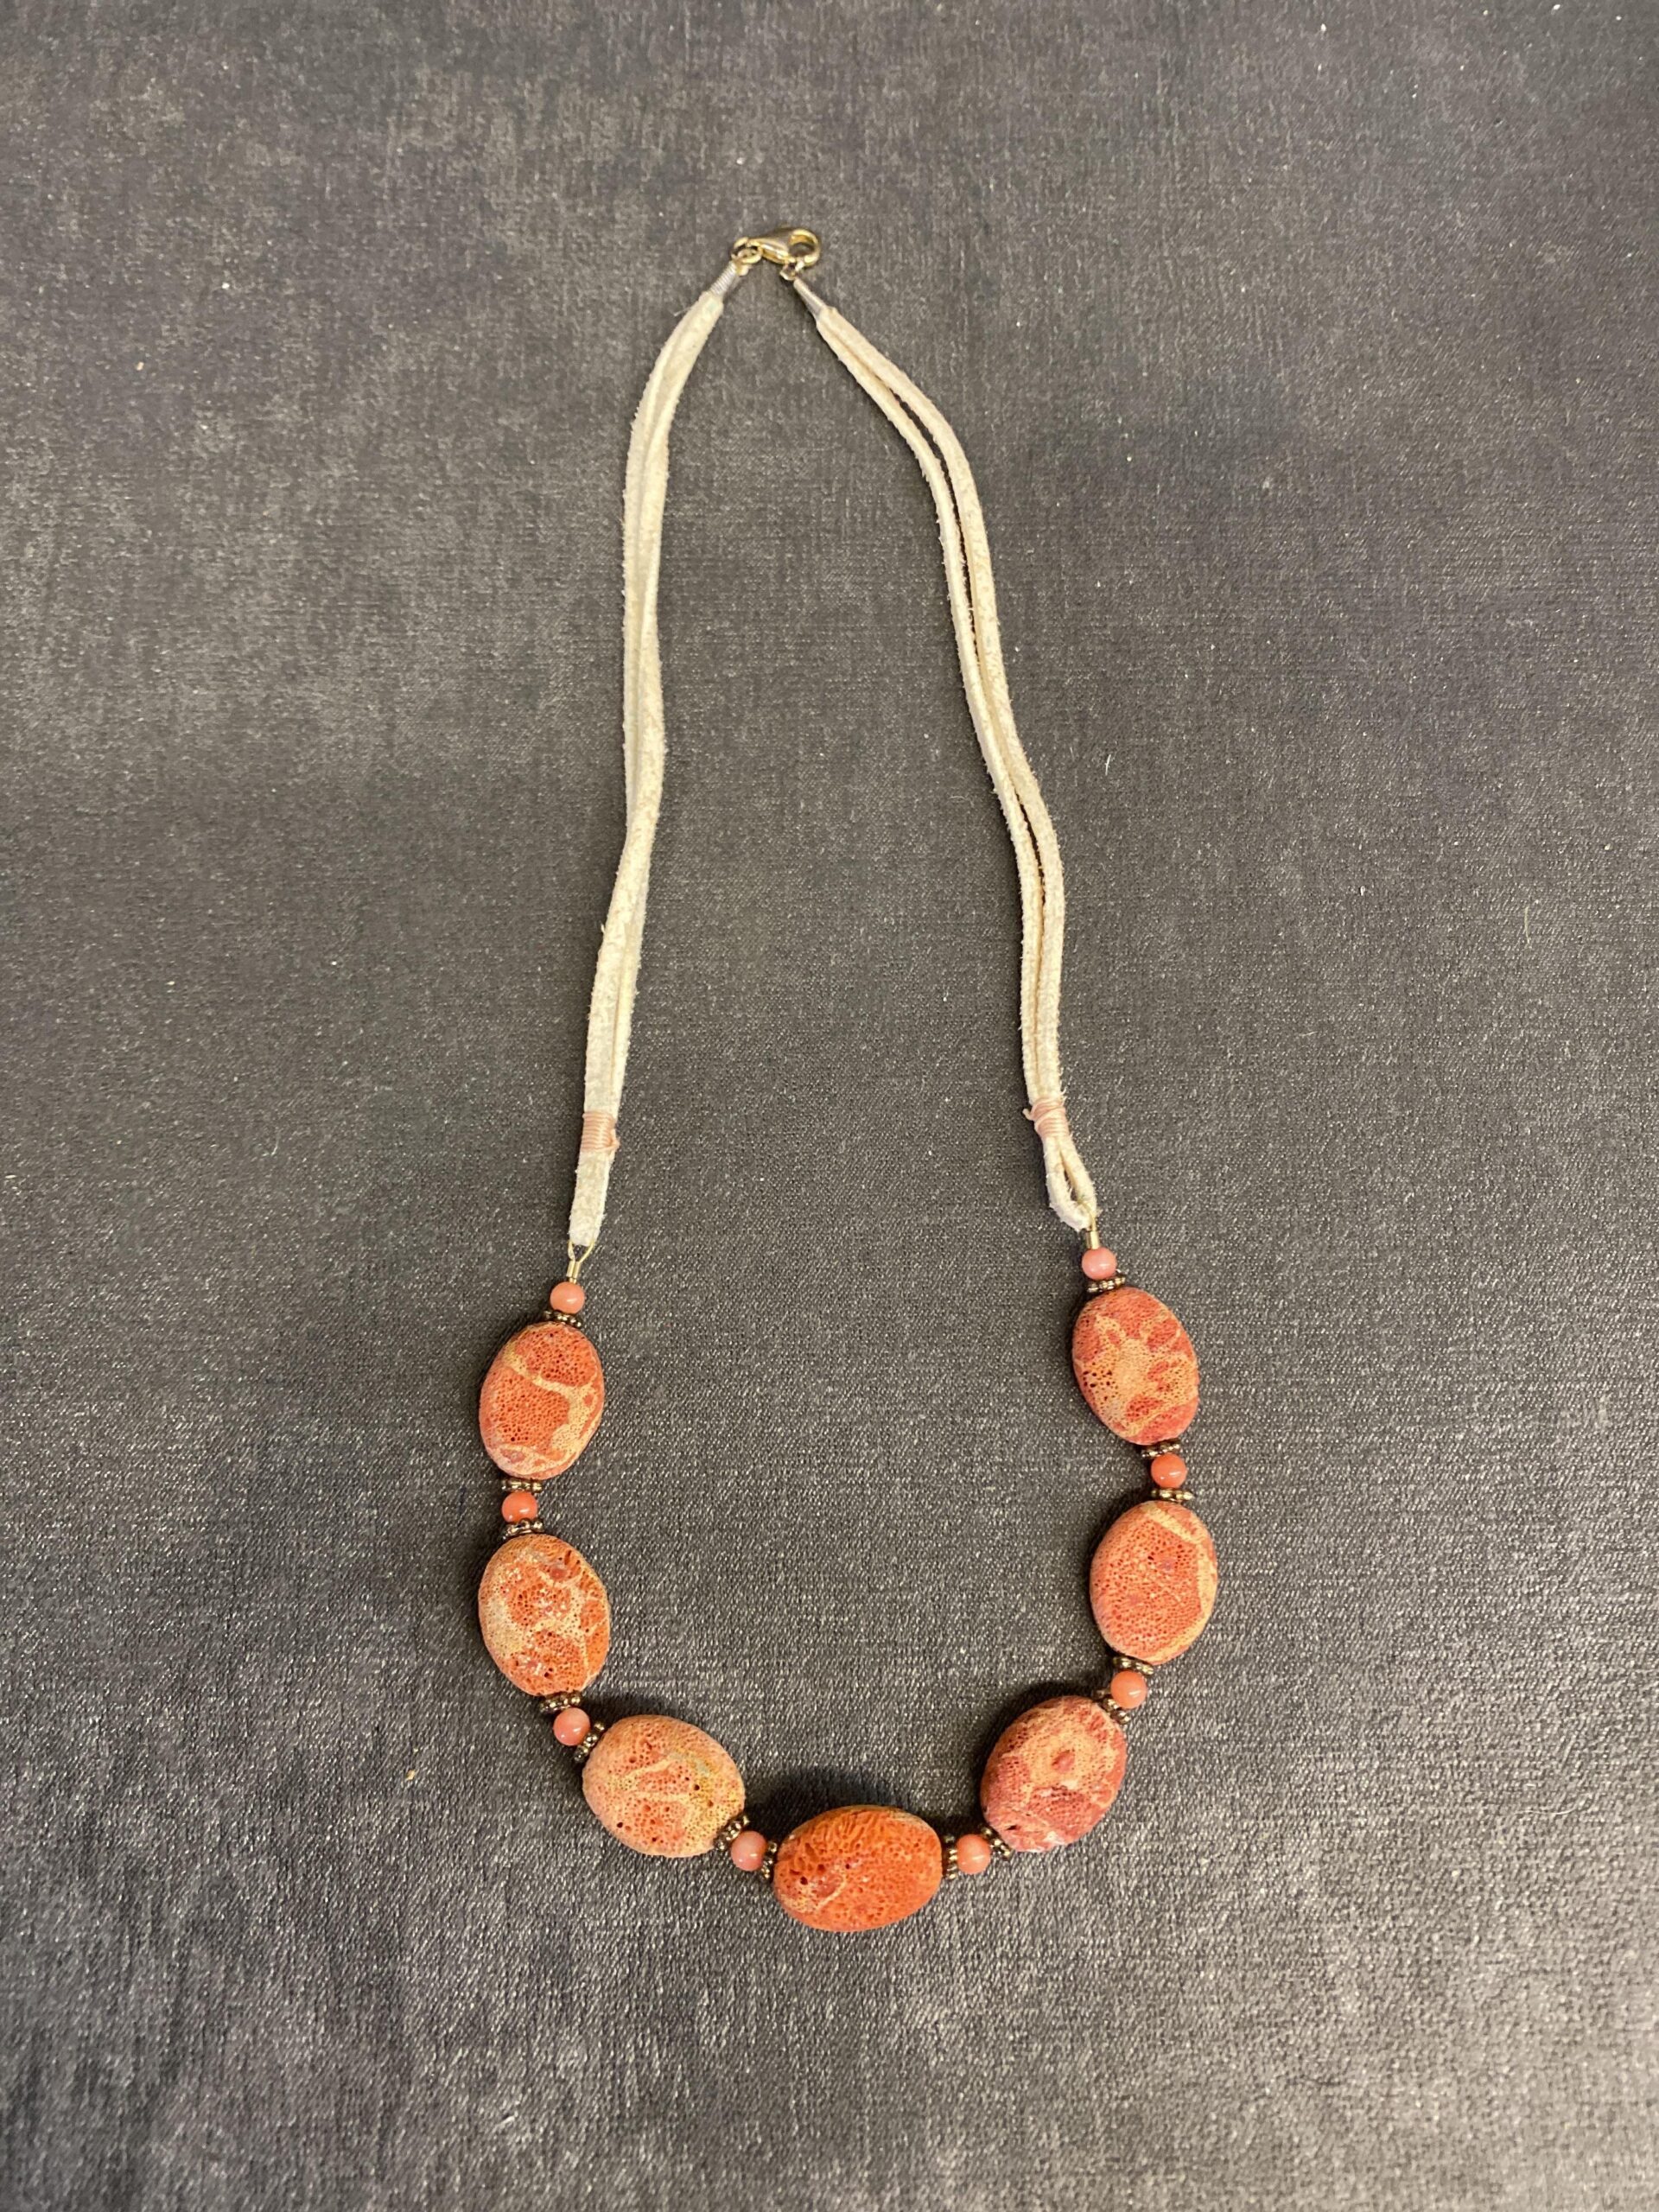 Necklace – Red Sponge Coral